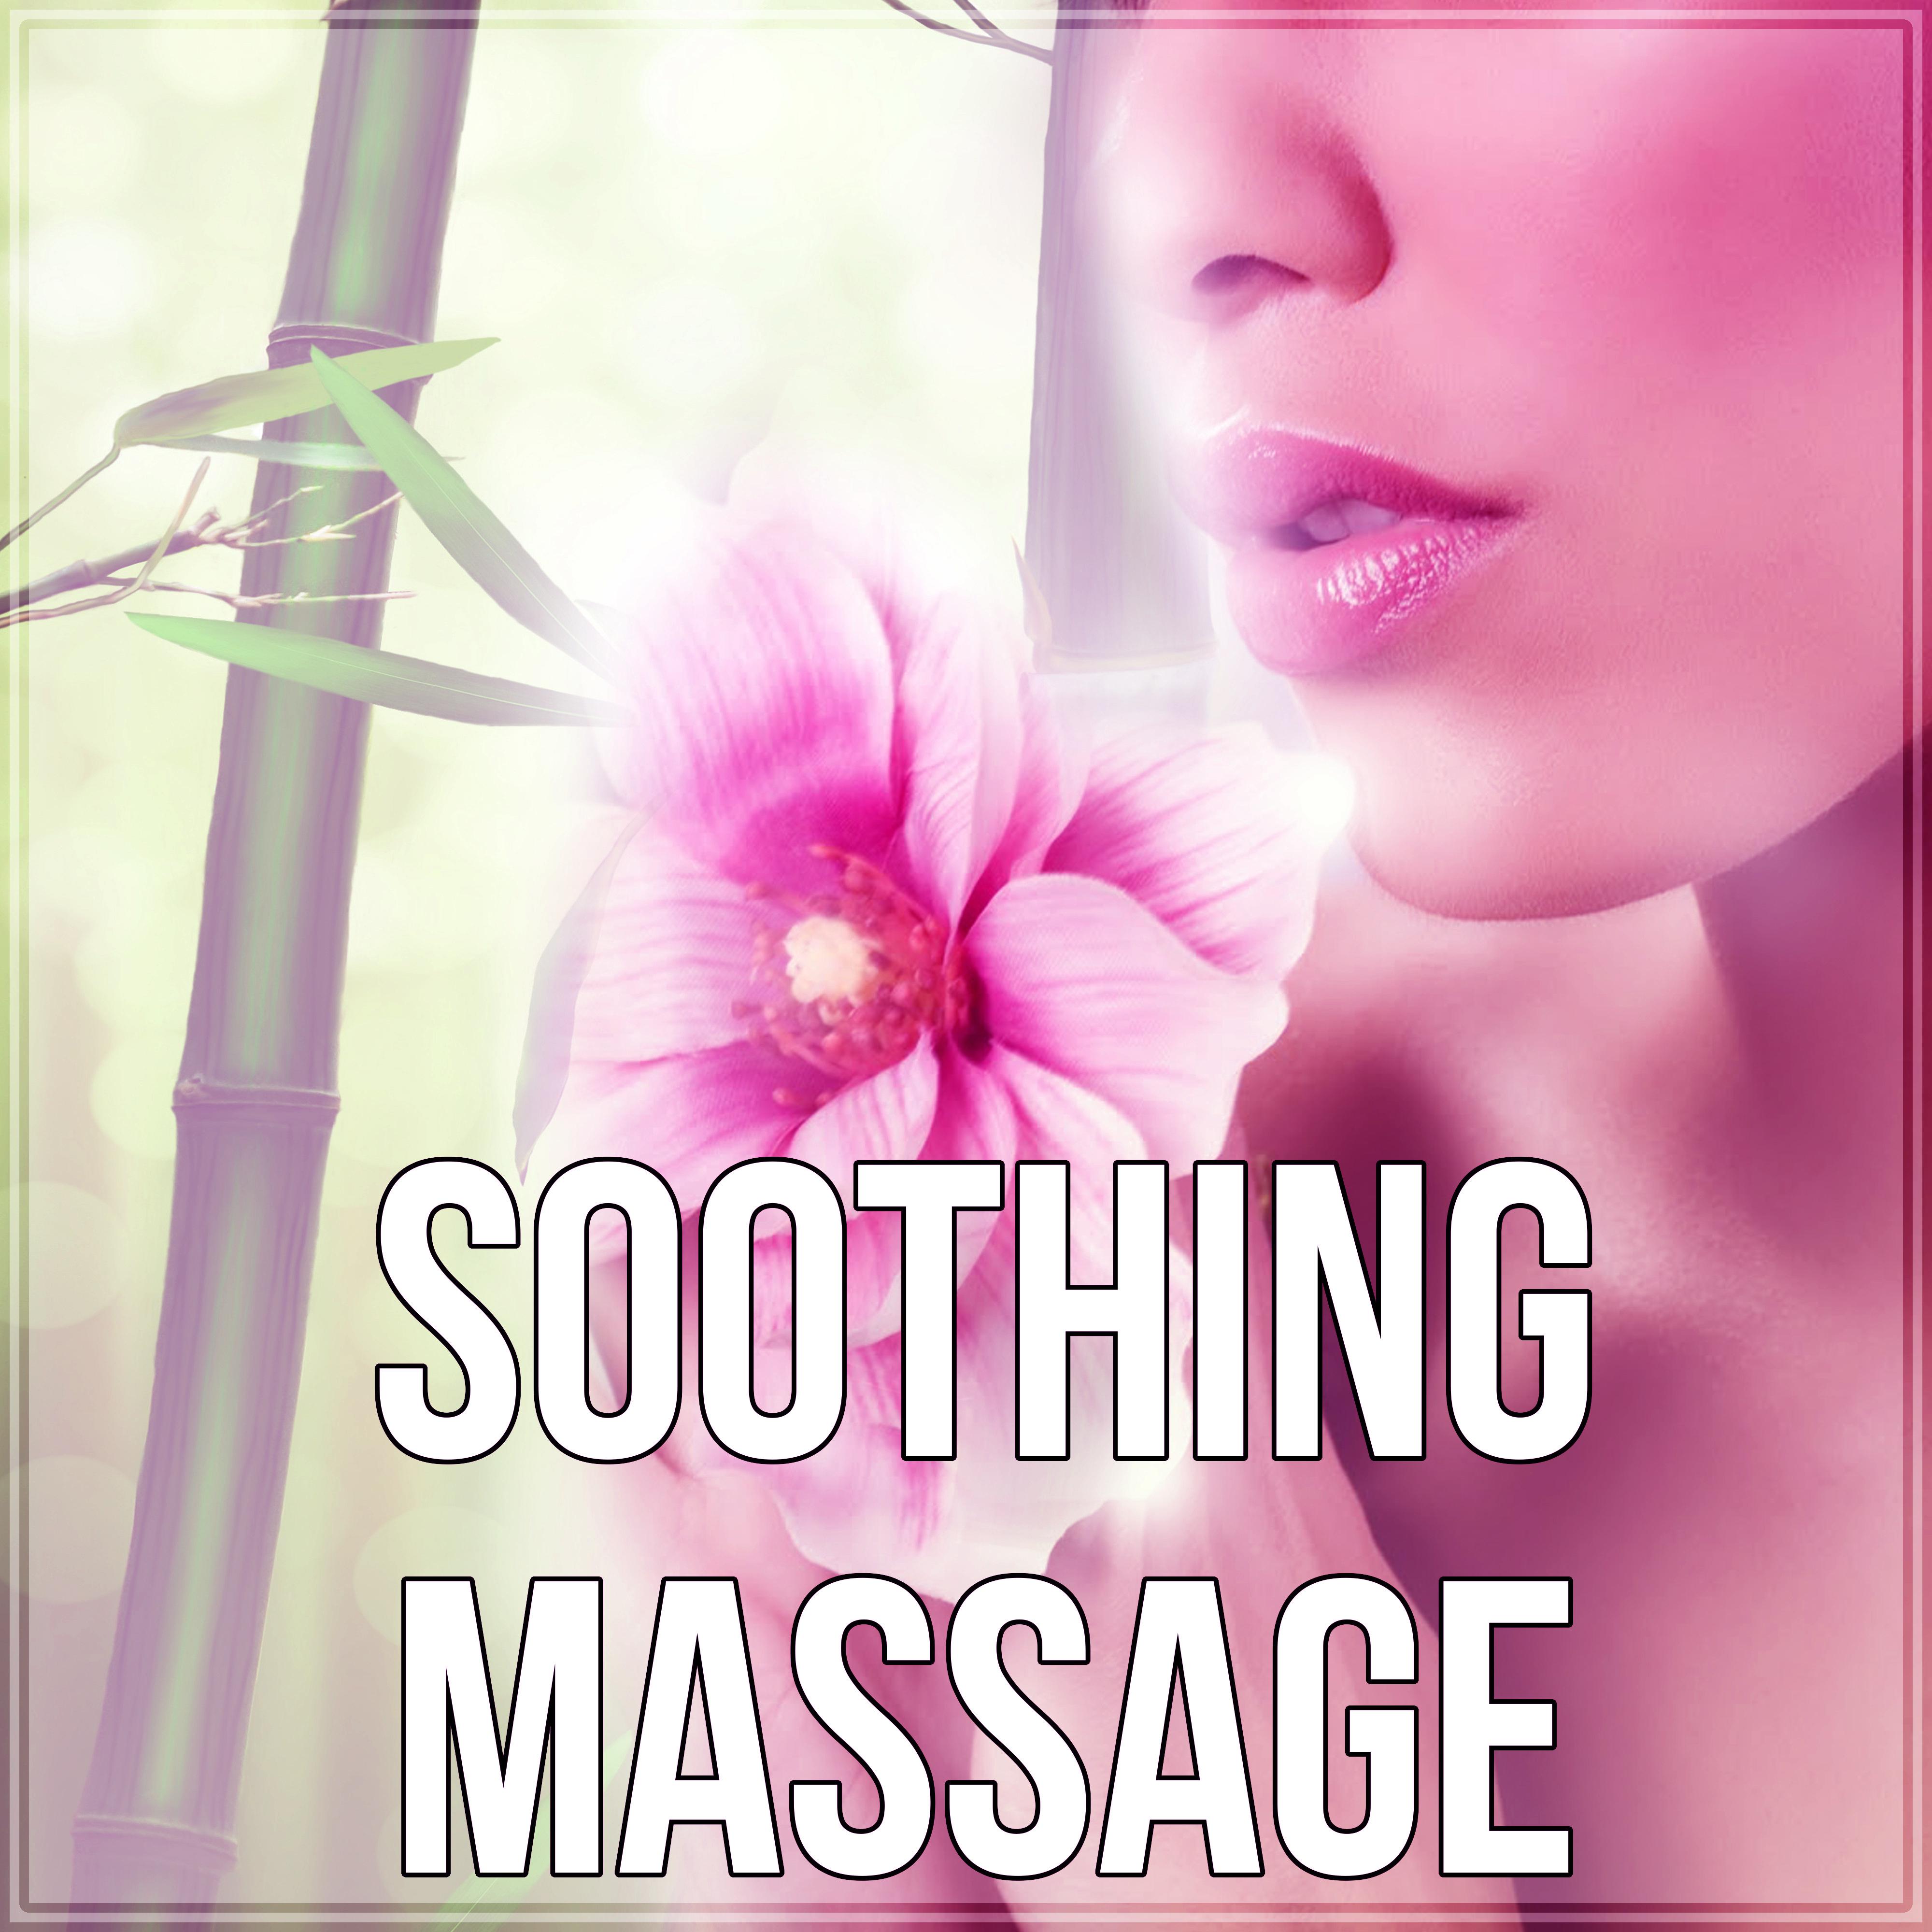 Soothing Massage - Beautiful Songs, Serenity Relaxing Spa, Intimate Moments, Instrumental Music with Nature Sounds for Massage Therapy, Music for Healing Through Sound and Touch